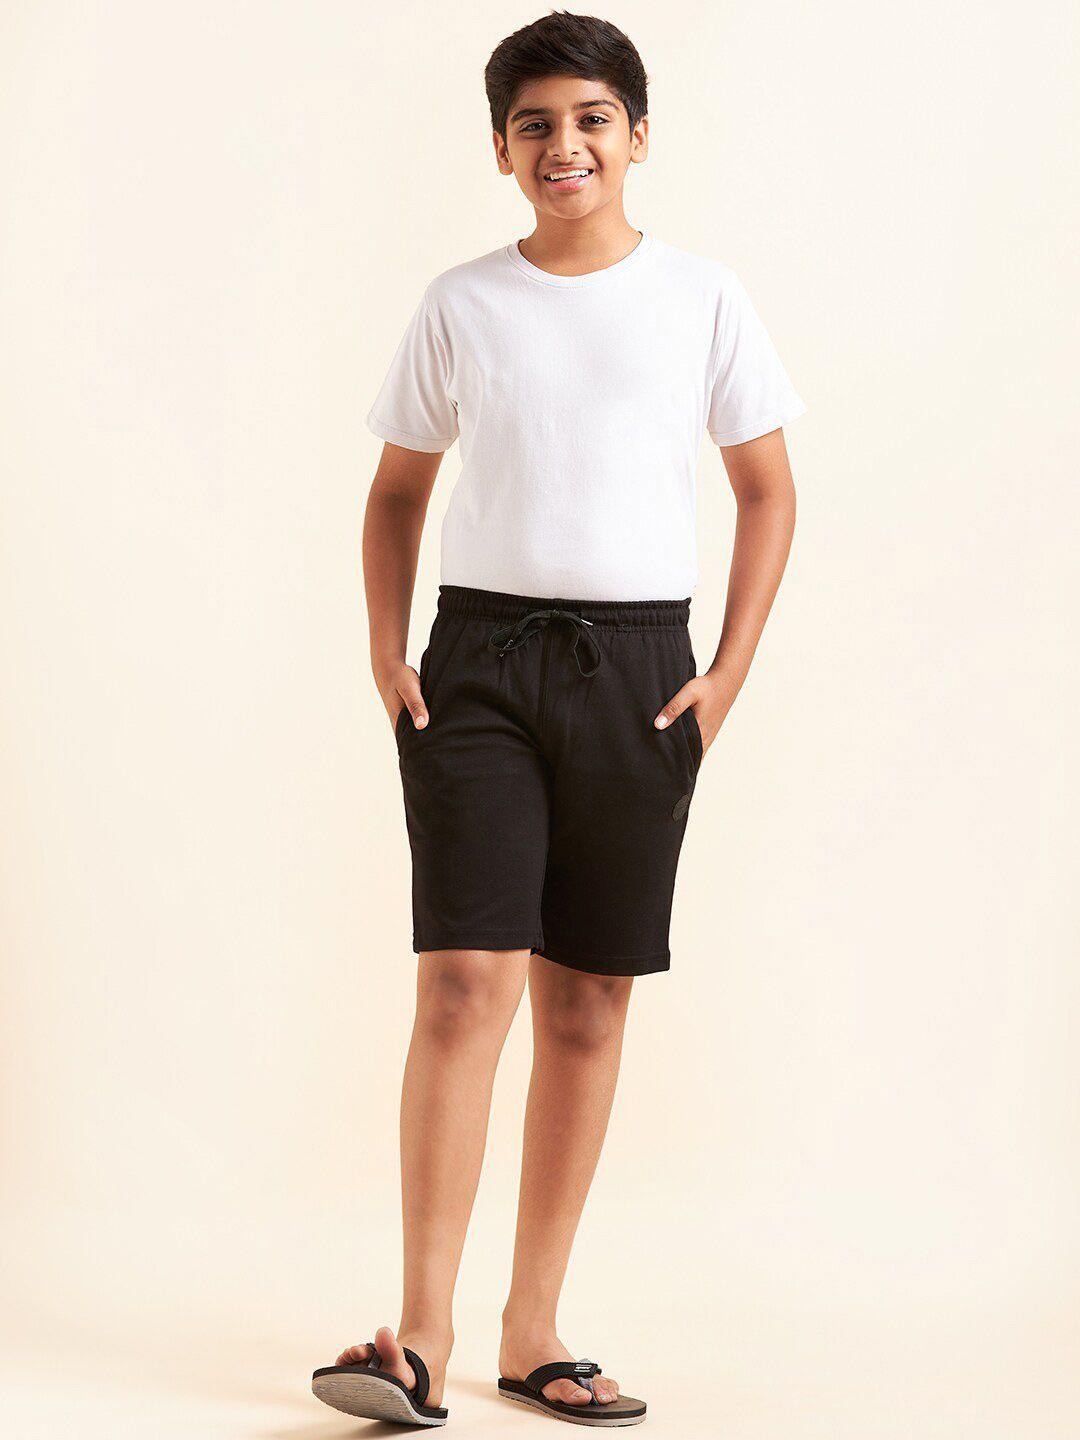 sweet-dreams-boys-solid-lounge-shorts